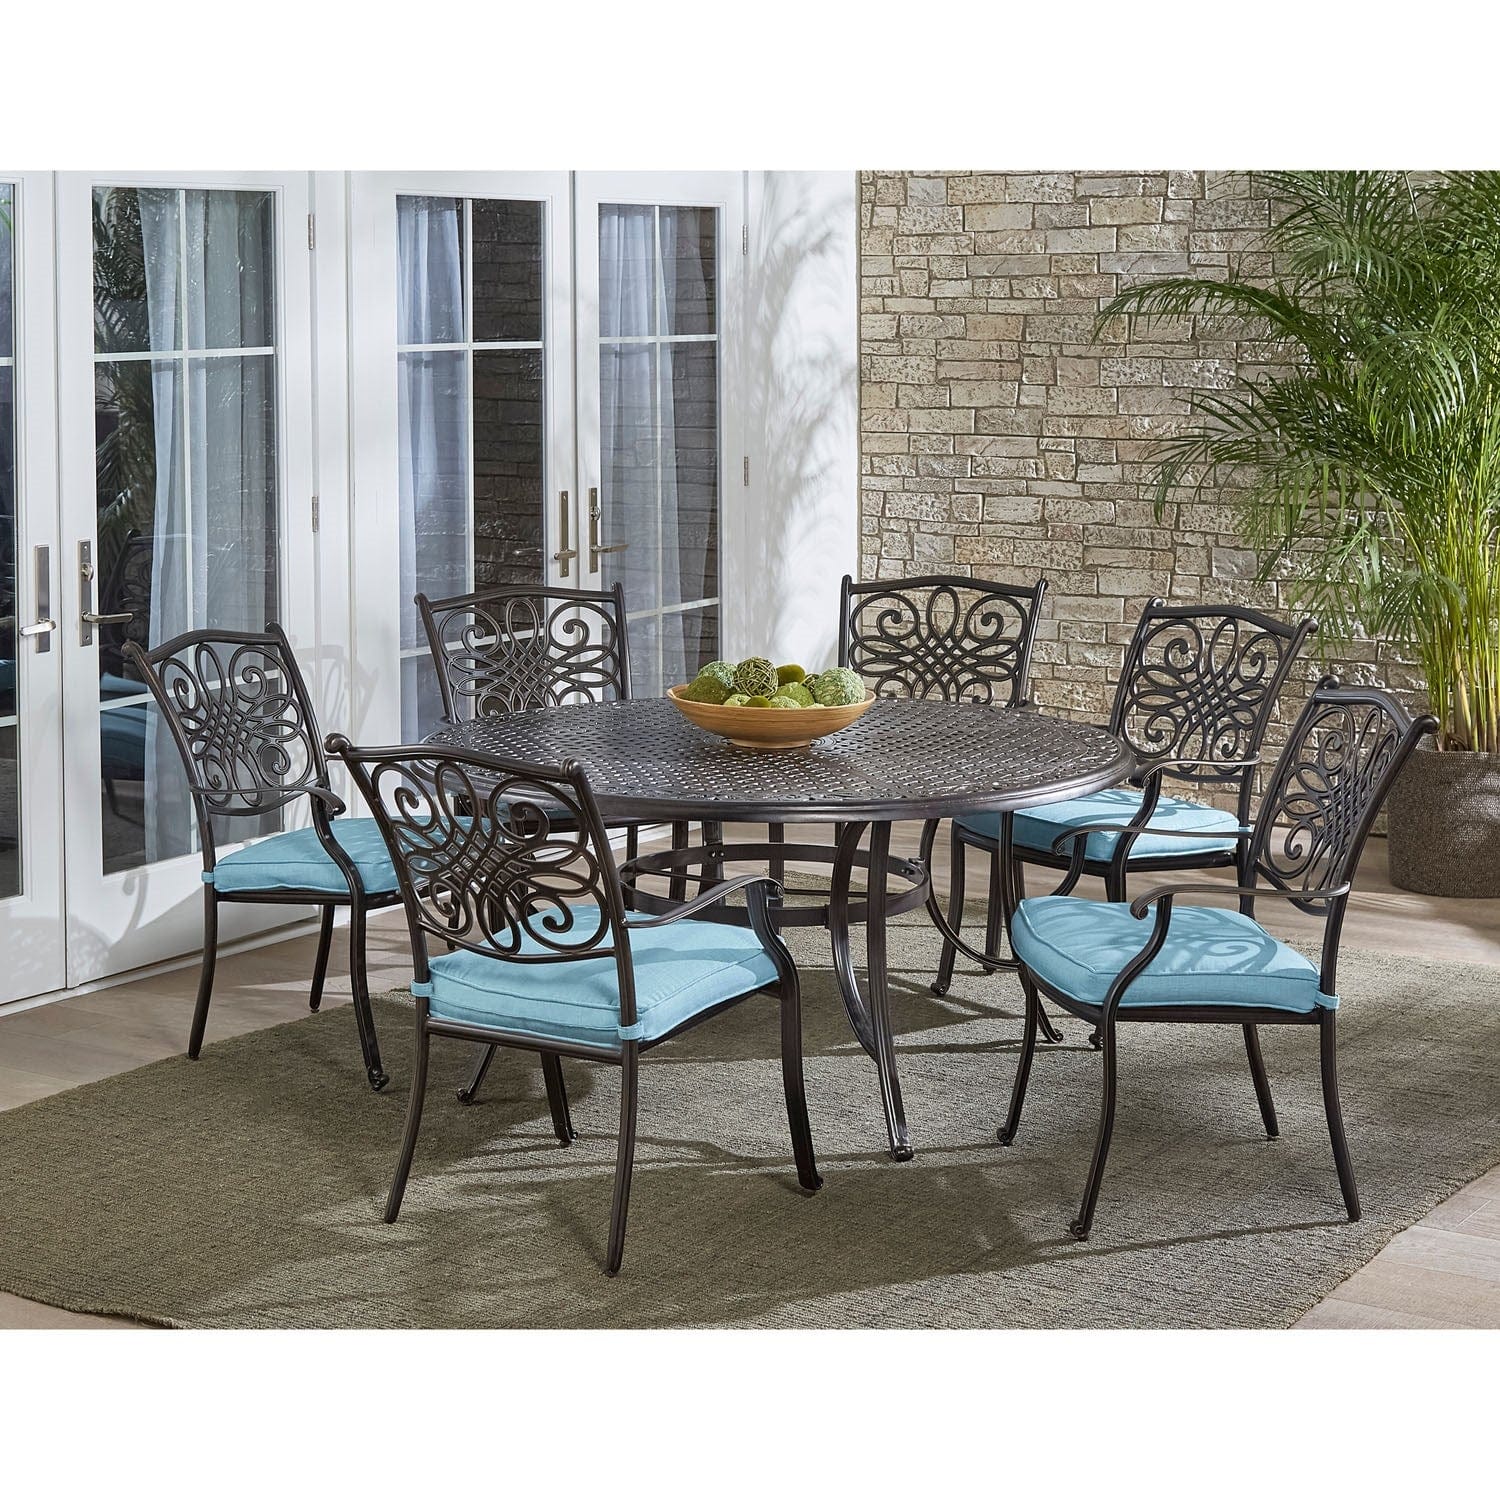 Hanover Outdoor Dining Set Hanover - Traditions 7-Piece Aluminum Frame Dining Set in Blue with Six Dining Chairs and a 60 In. Cast-top Table | TRADDN7PCRD-BLU